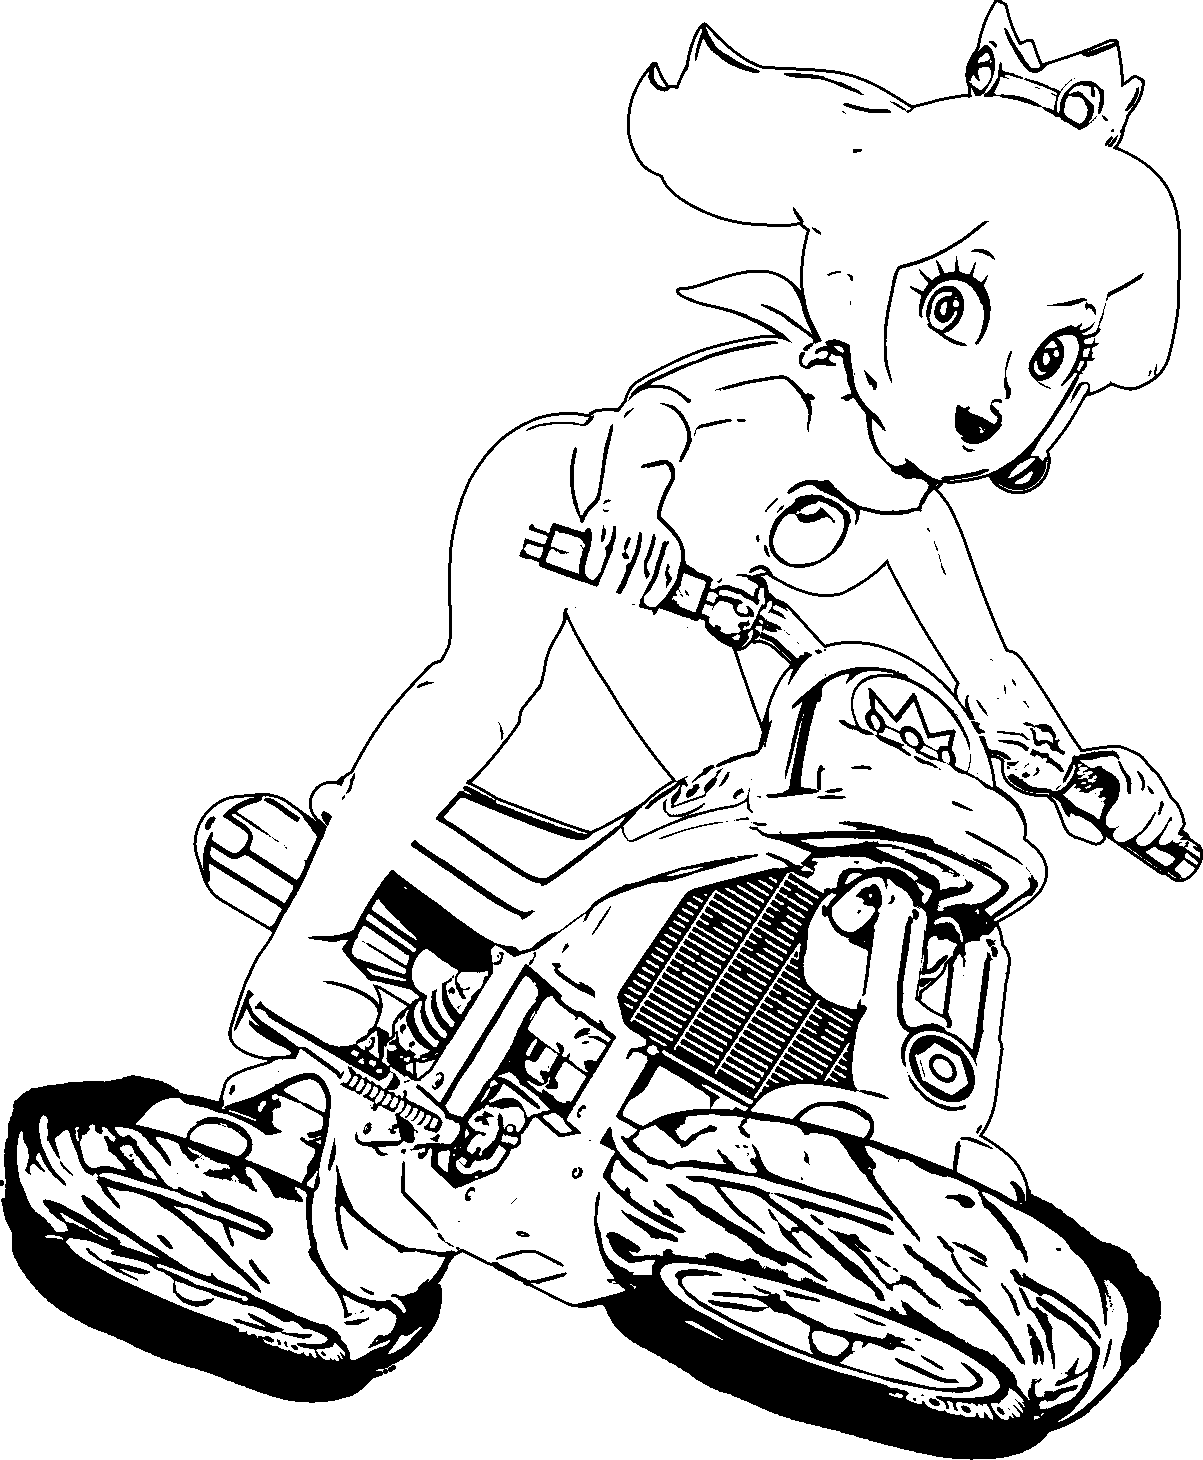 Mario Kart 8 Colouring Pages - High Quality Coloring Pages